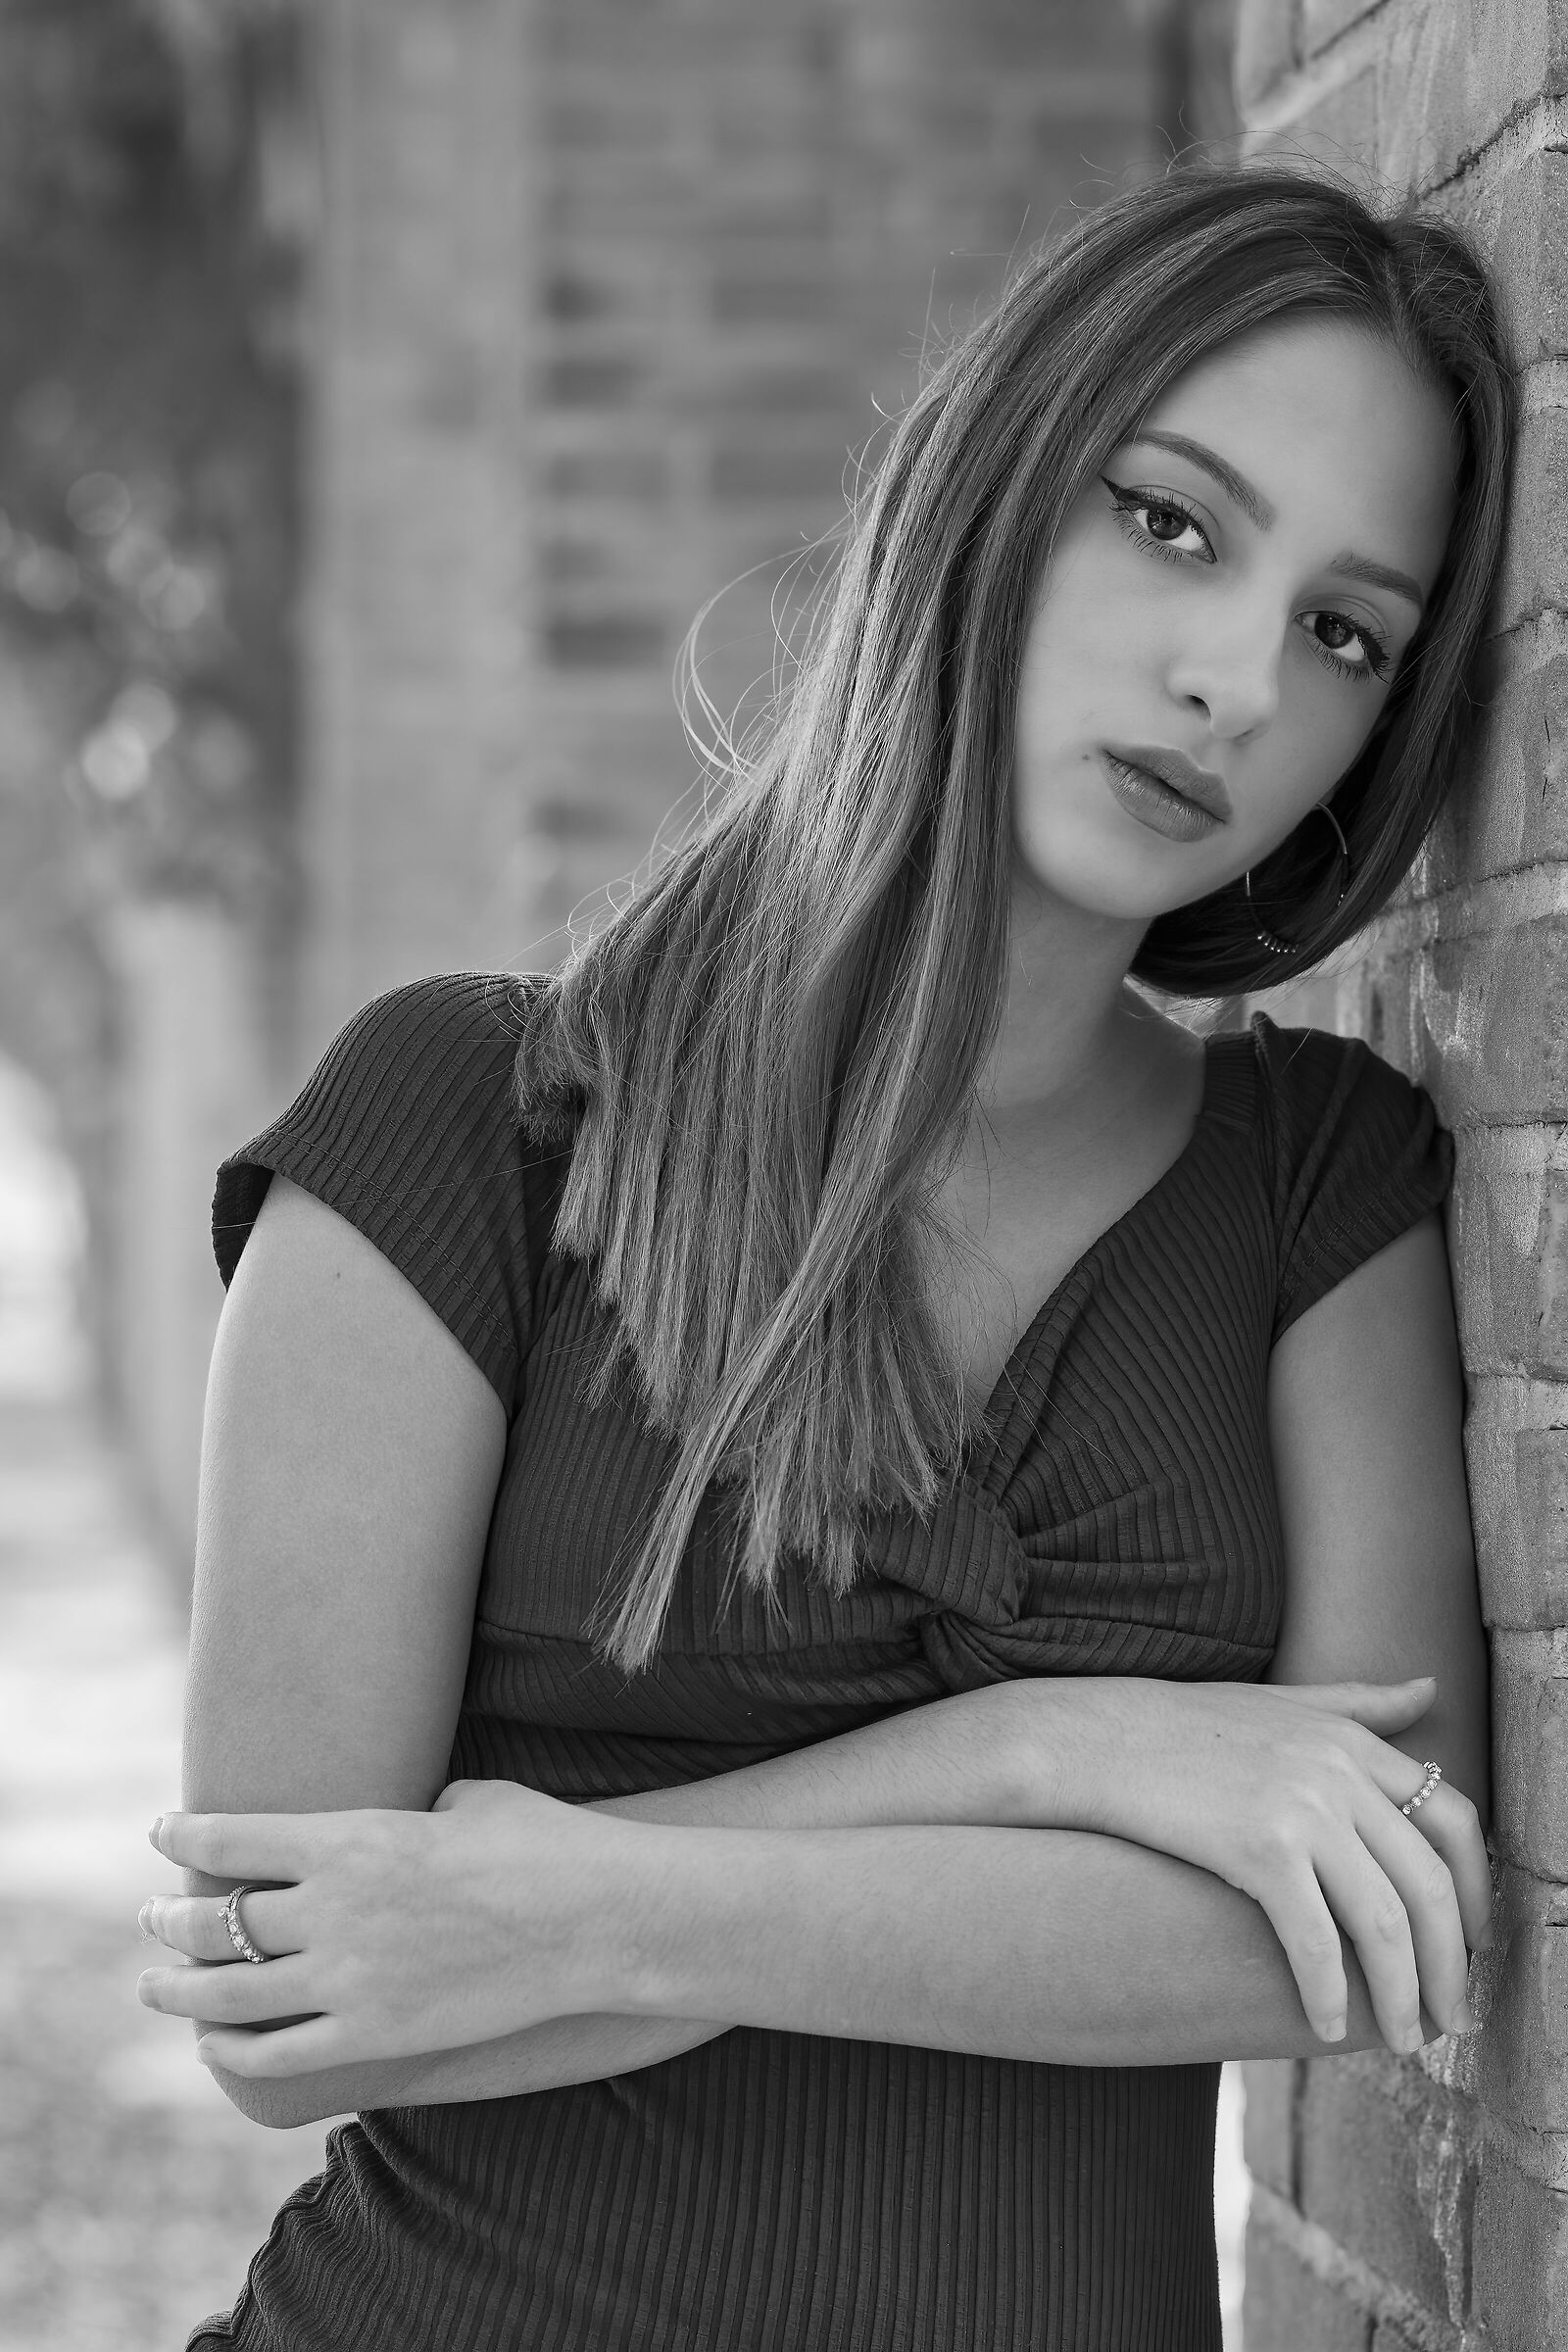 Another shot of Adela In B&W...